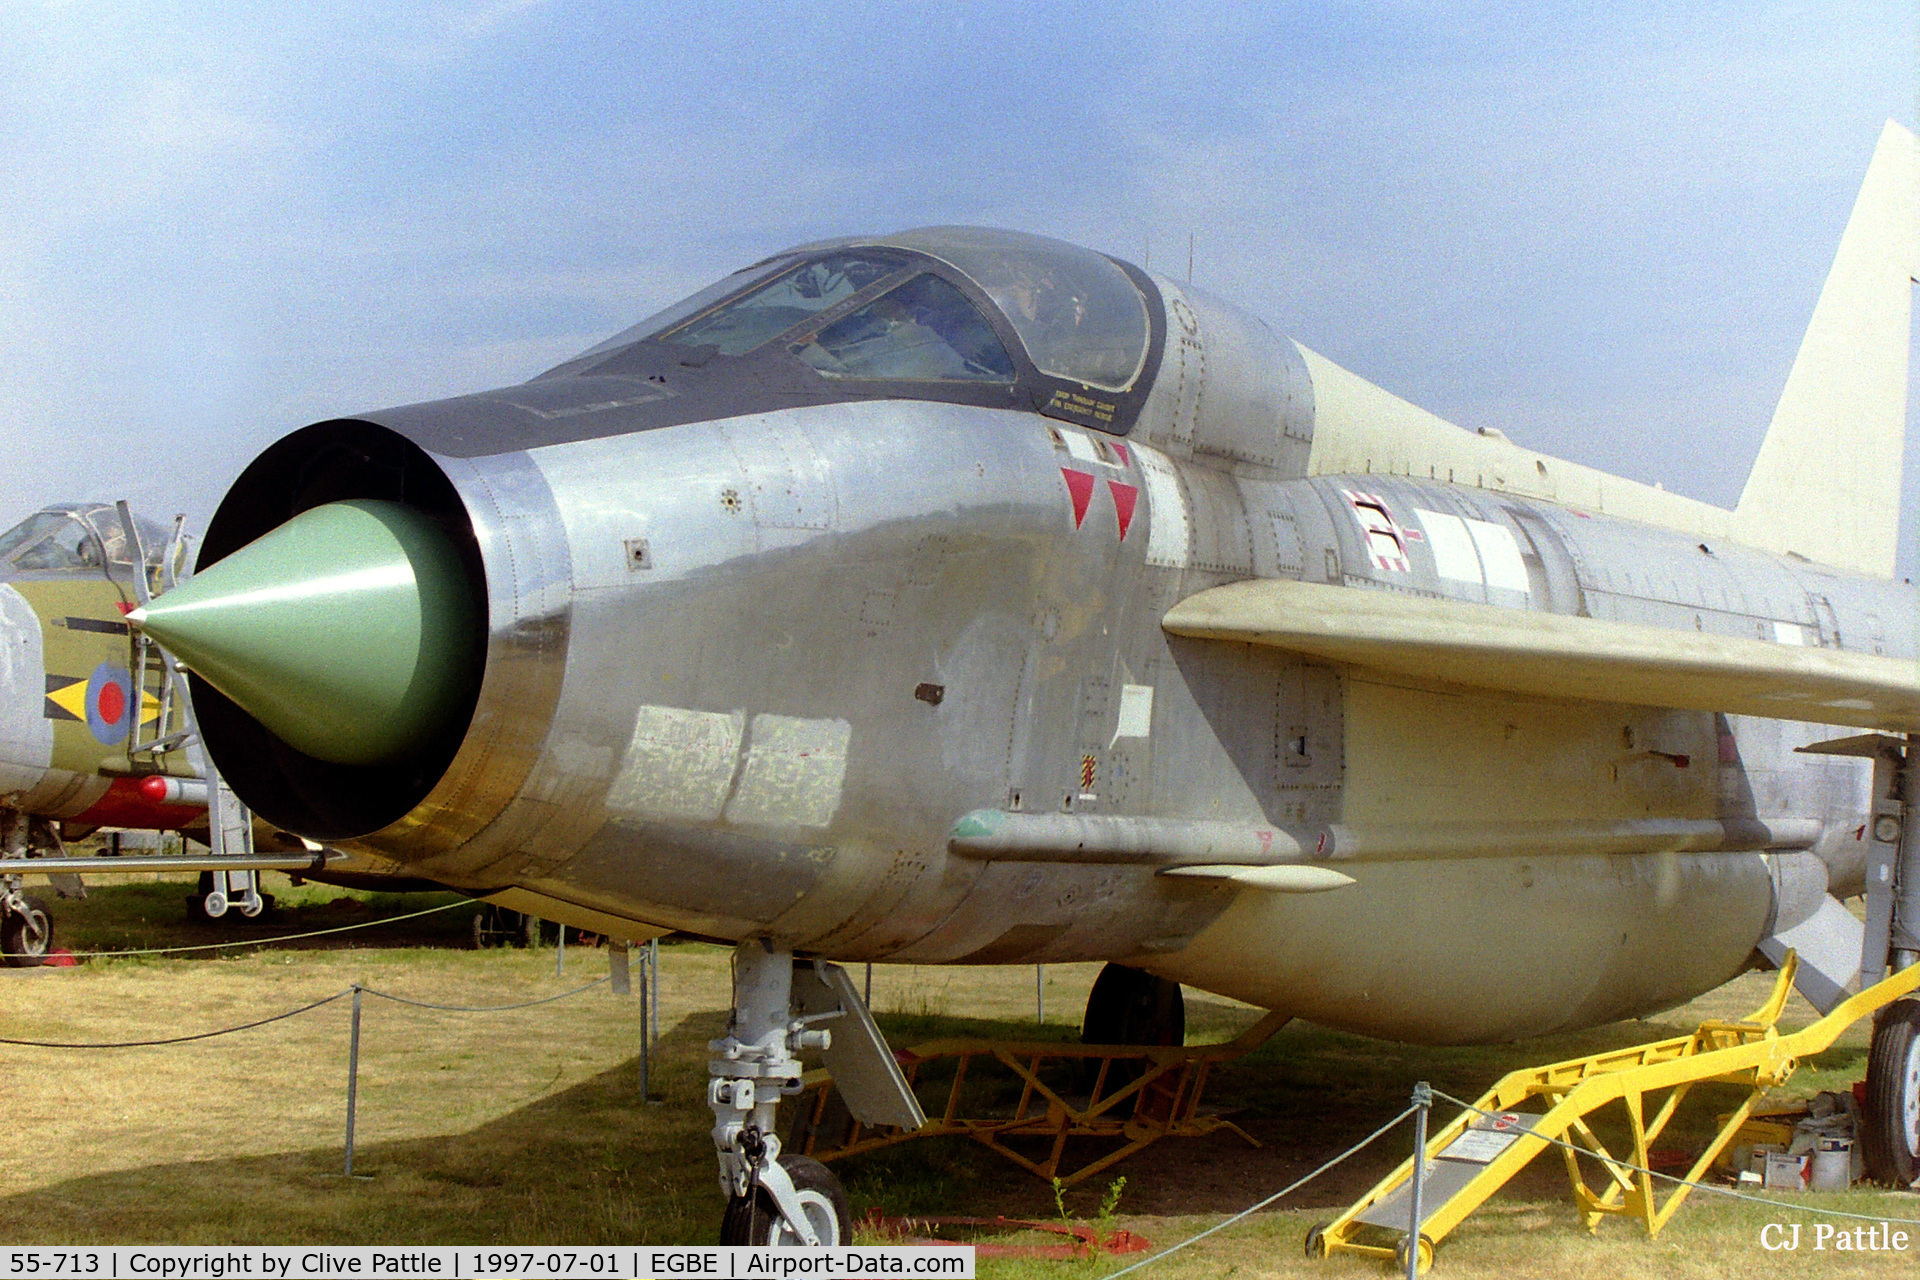 55-713, English Electric Lightning T.55 C/N 95026, On display at the Midland Air Museum in July 1997 mid-restoration